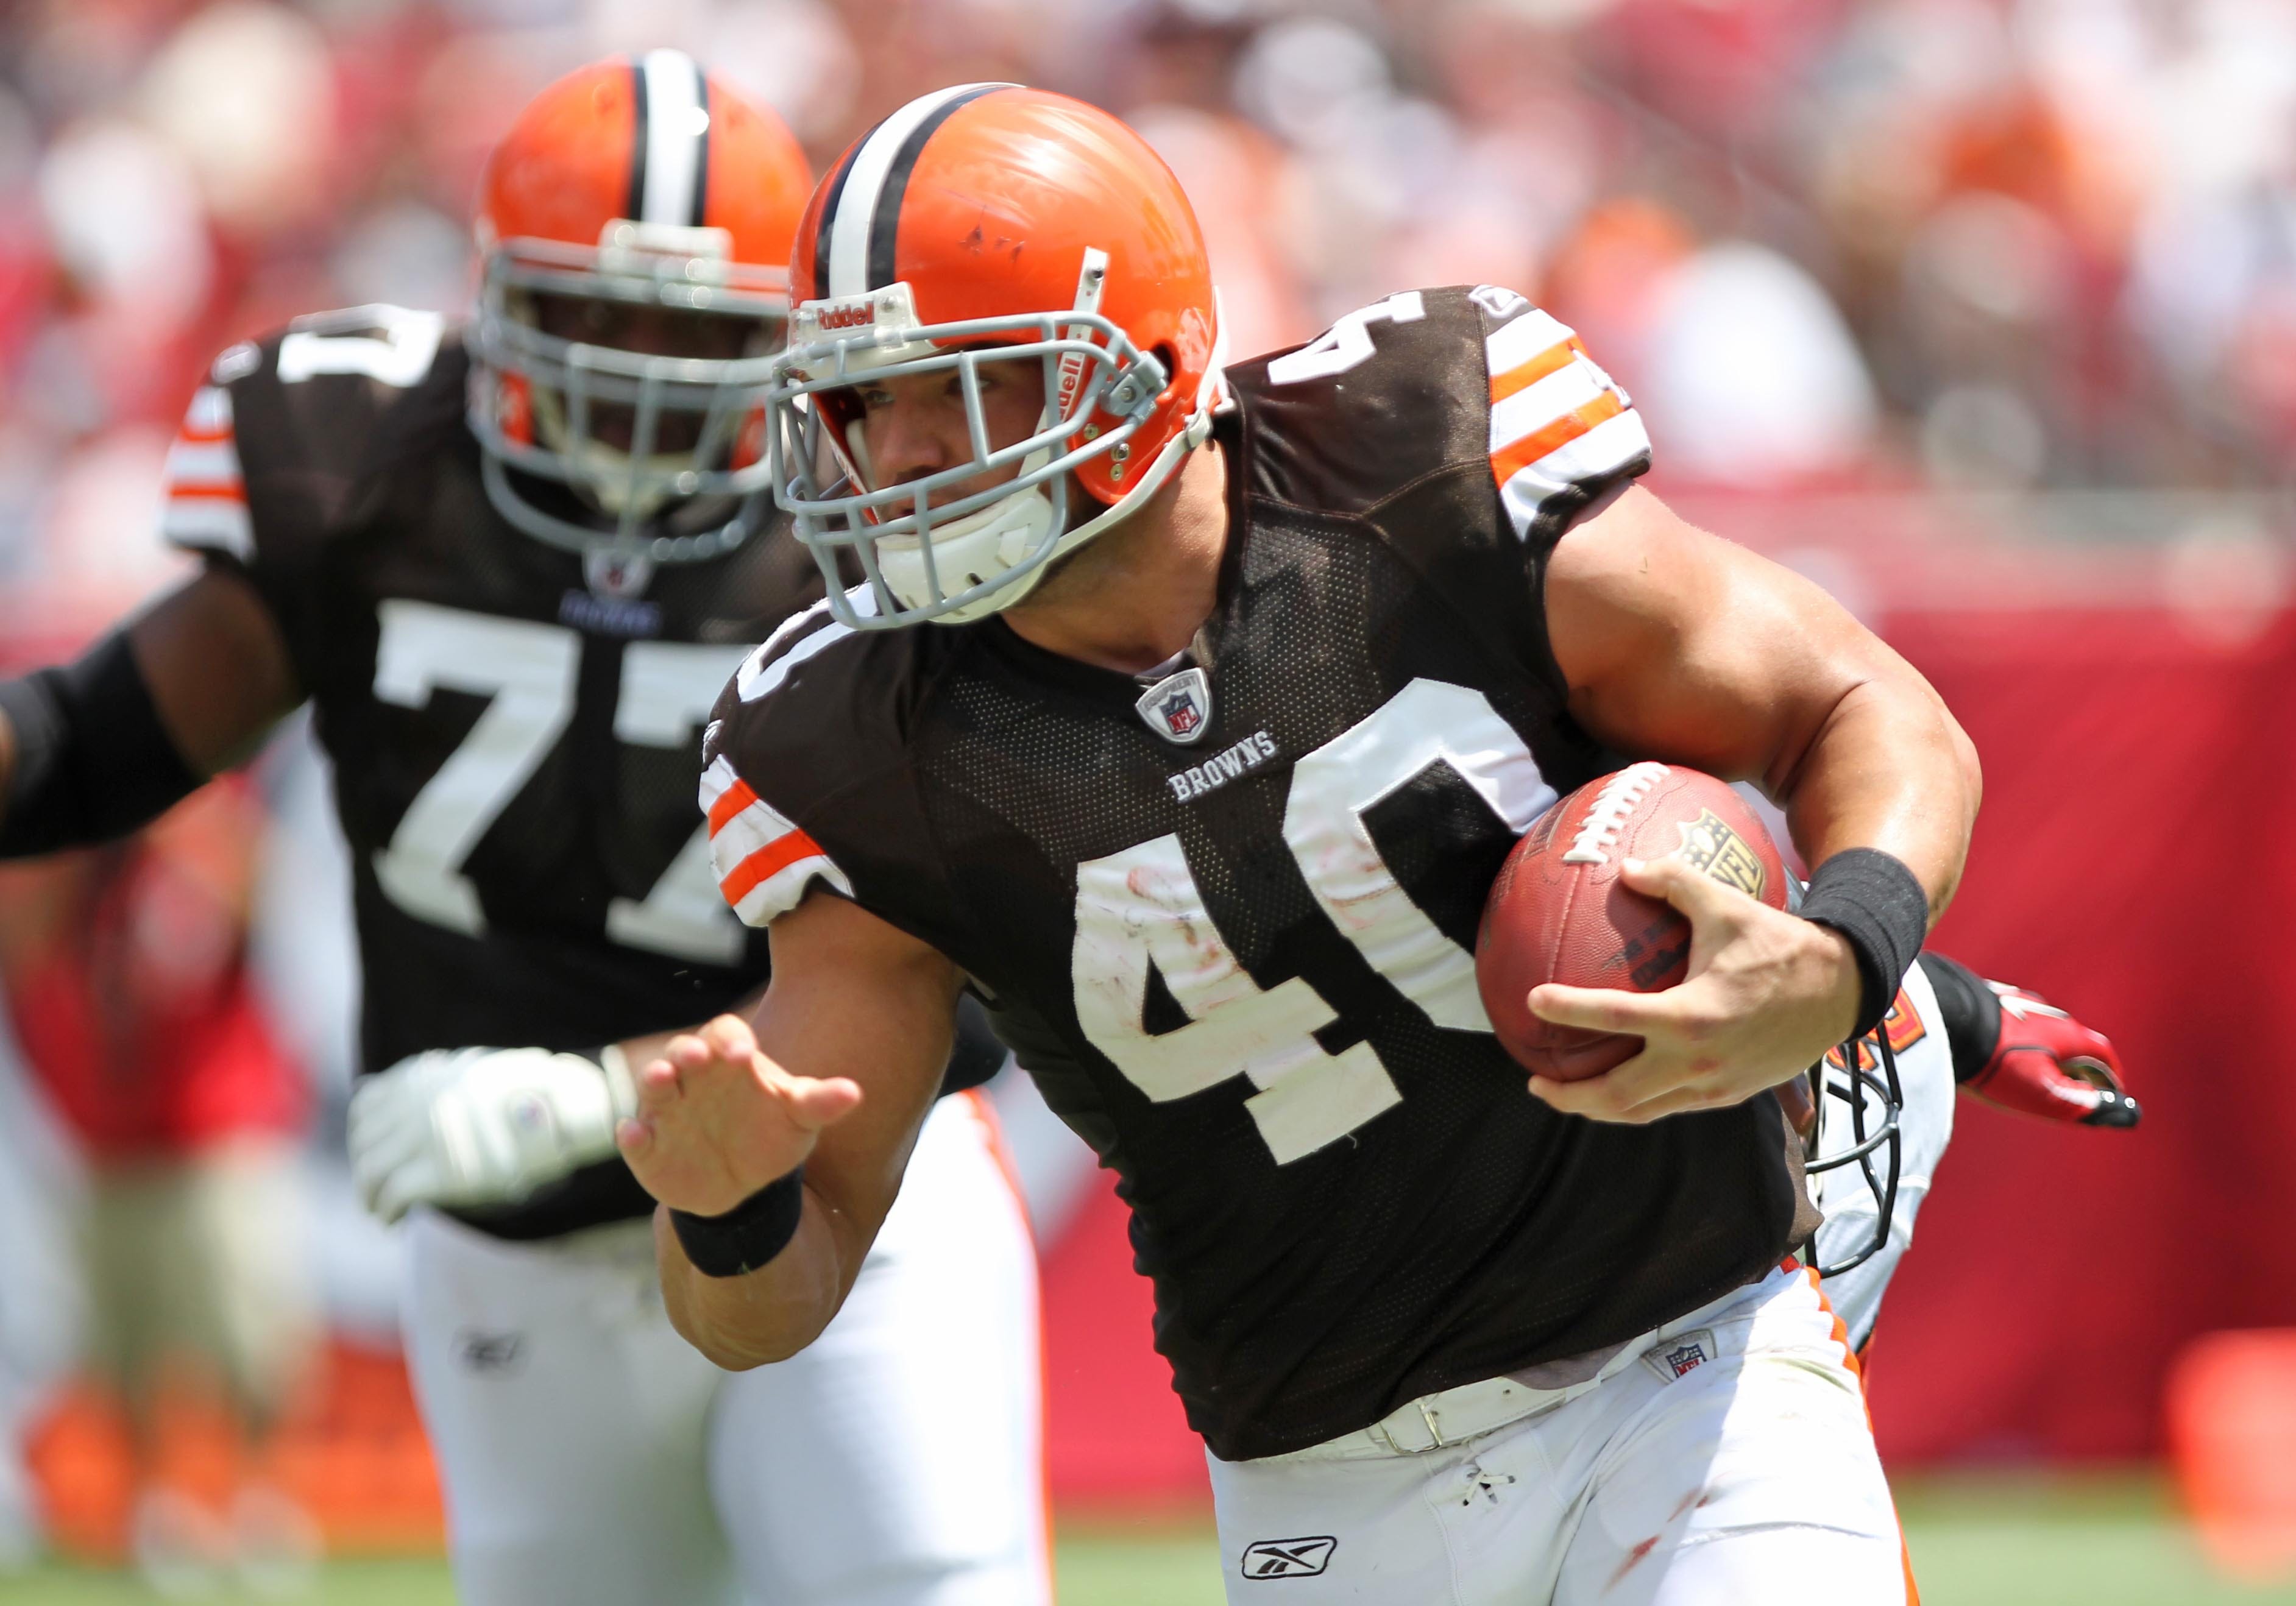 Ex-NFL RB Peyton Hillis discharged from hospital after saving family members in swimming accident